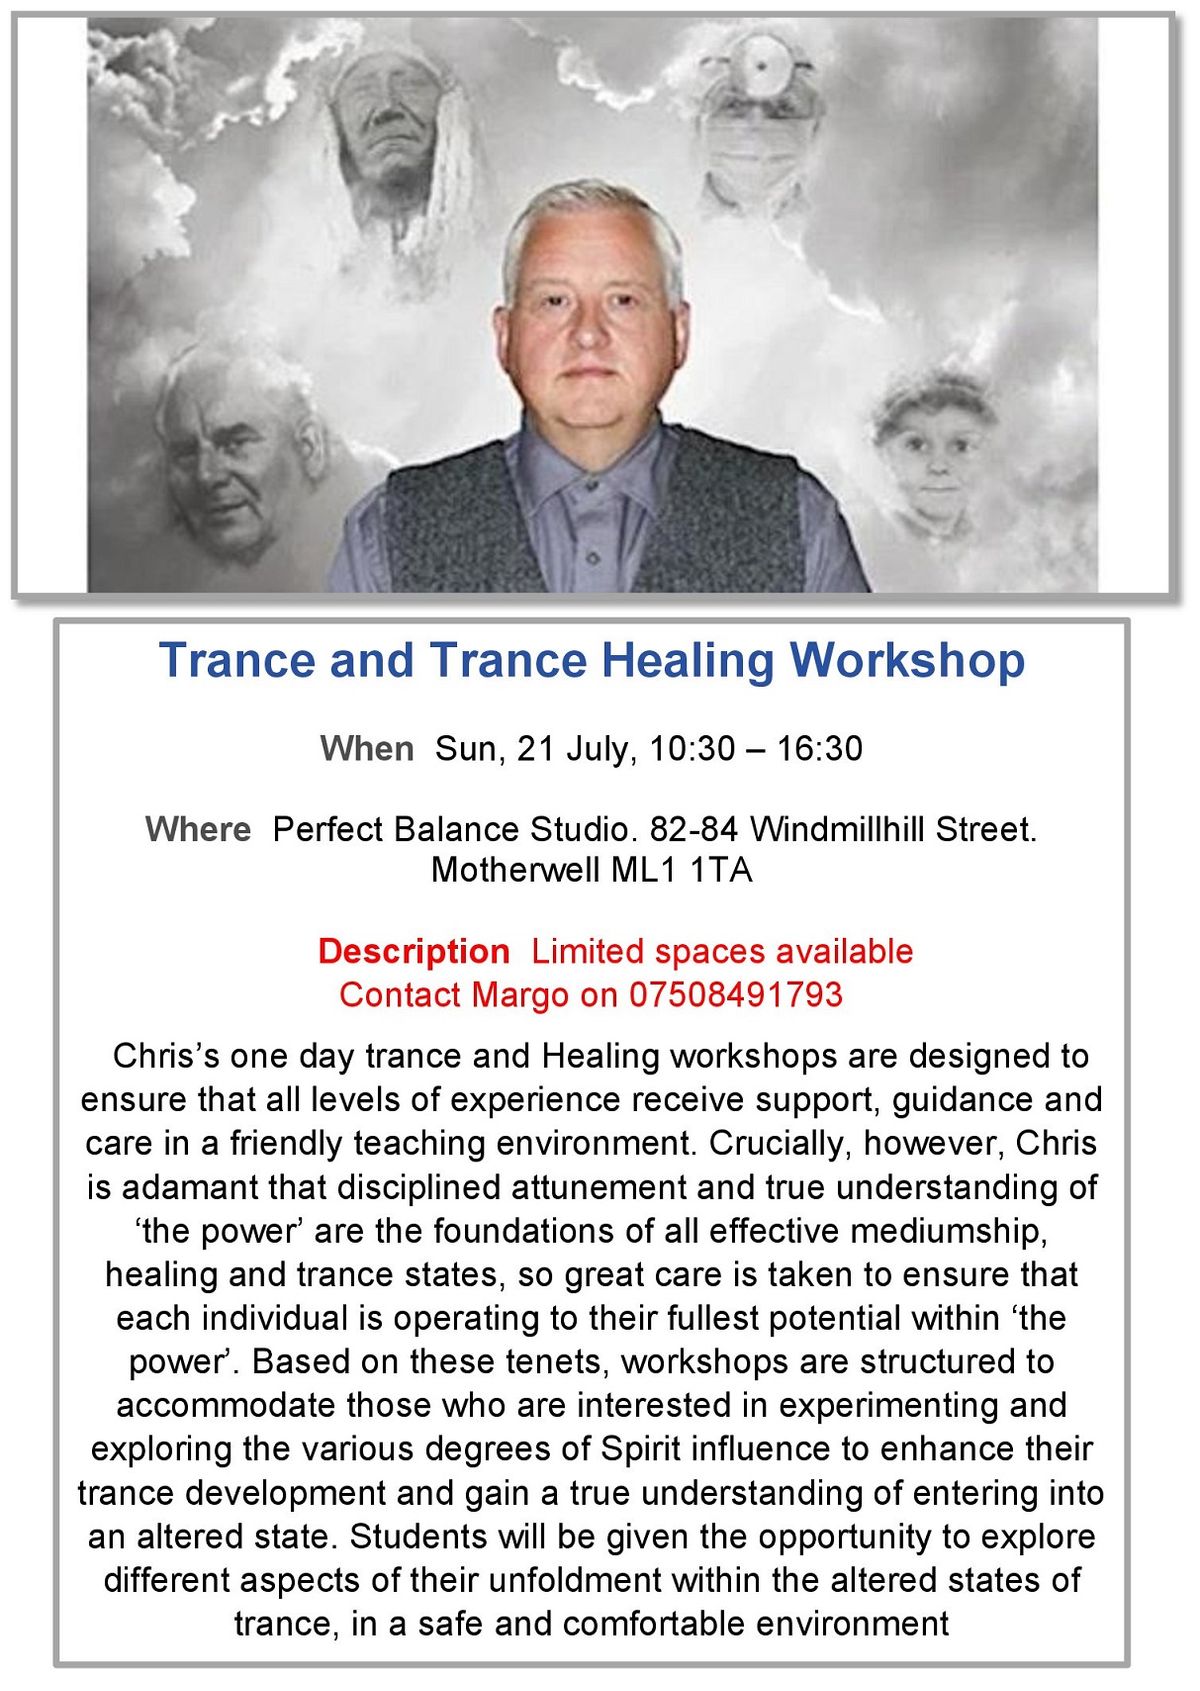 Trance and Trance Healing Workshop with Chris Ratter